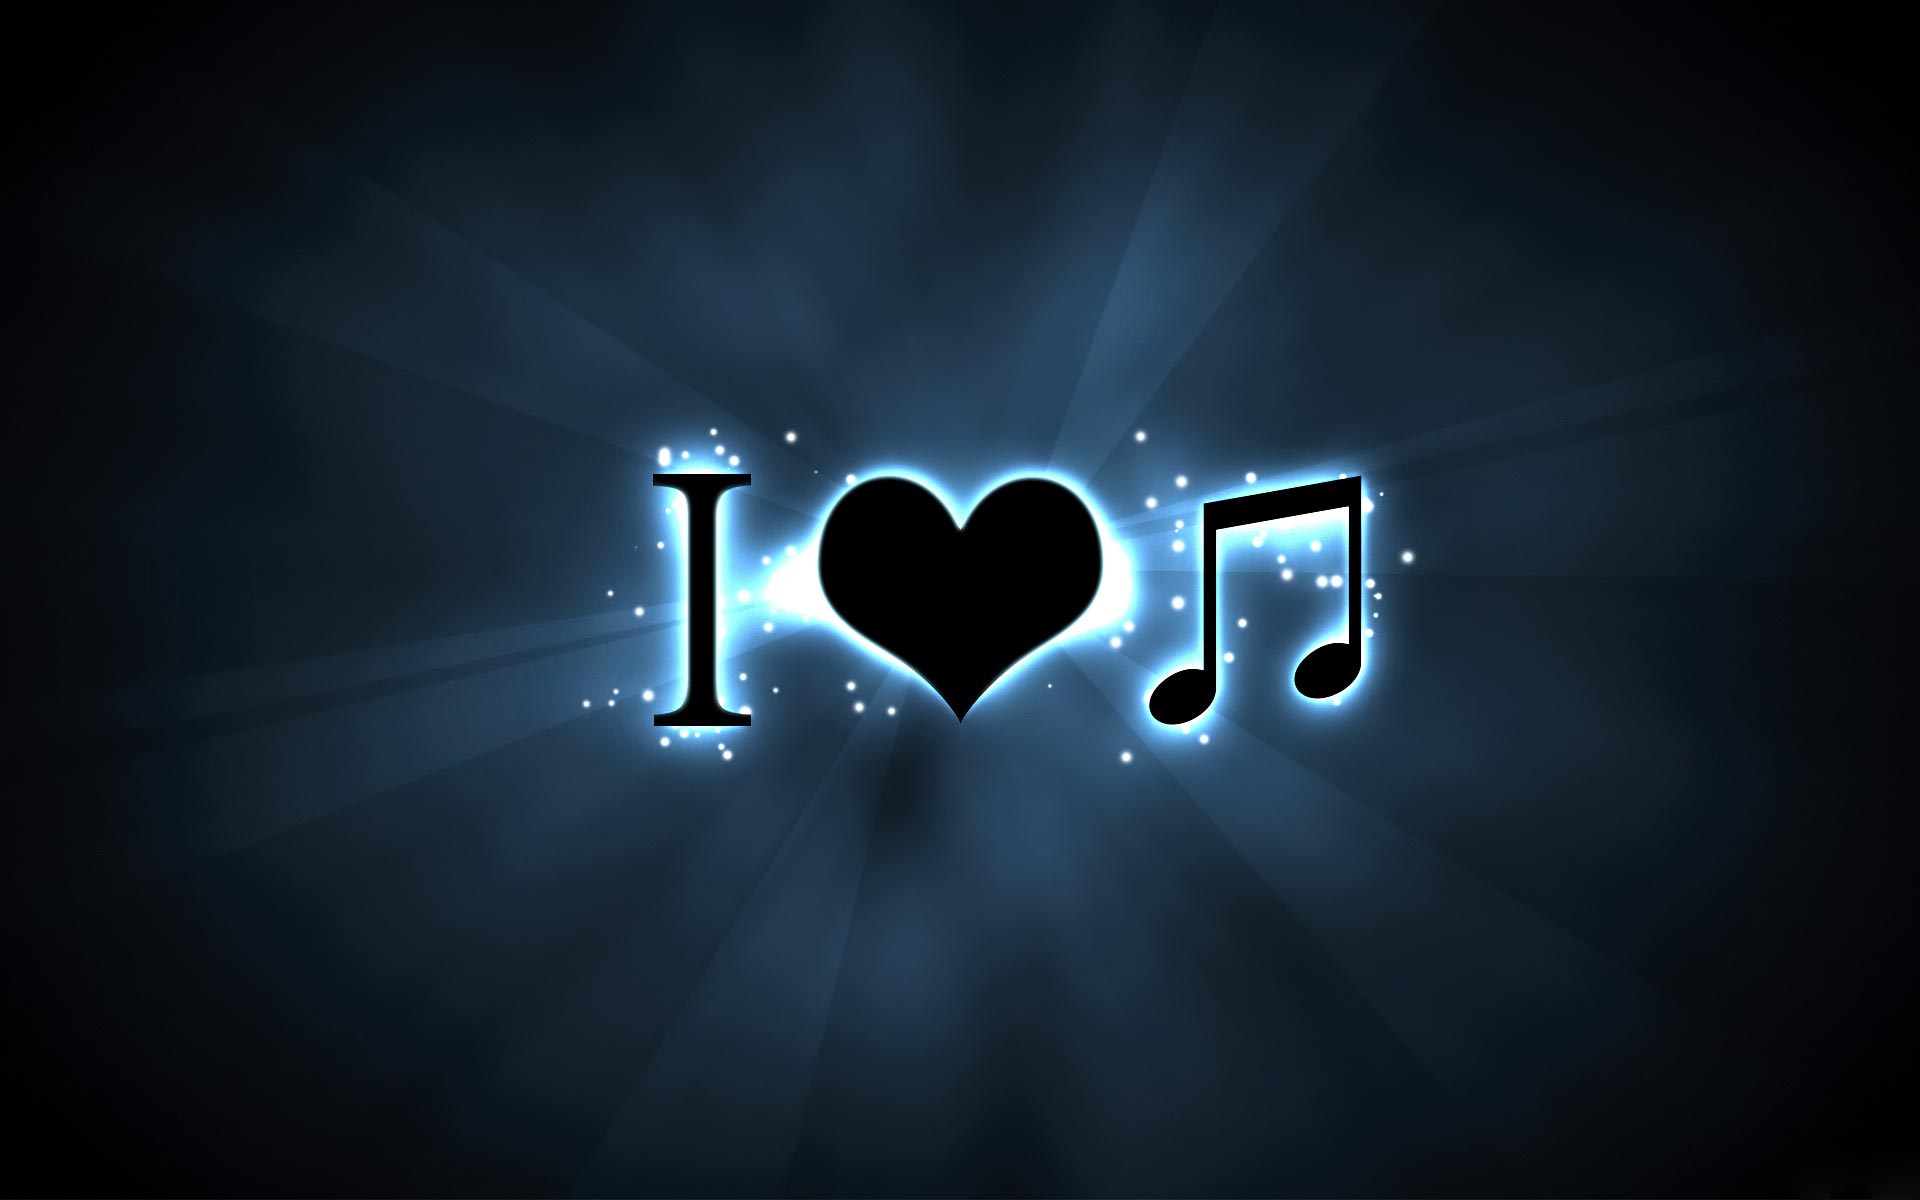 Music Wallpapers For Music Lovers | Online Magazine for Designers ...